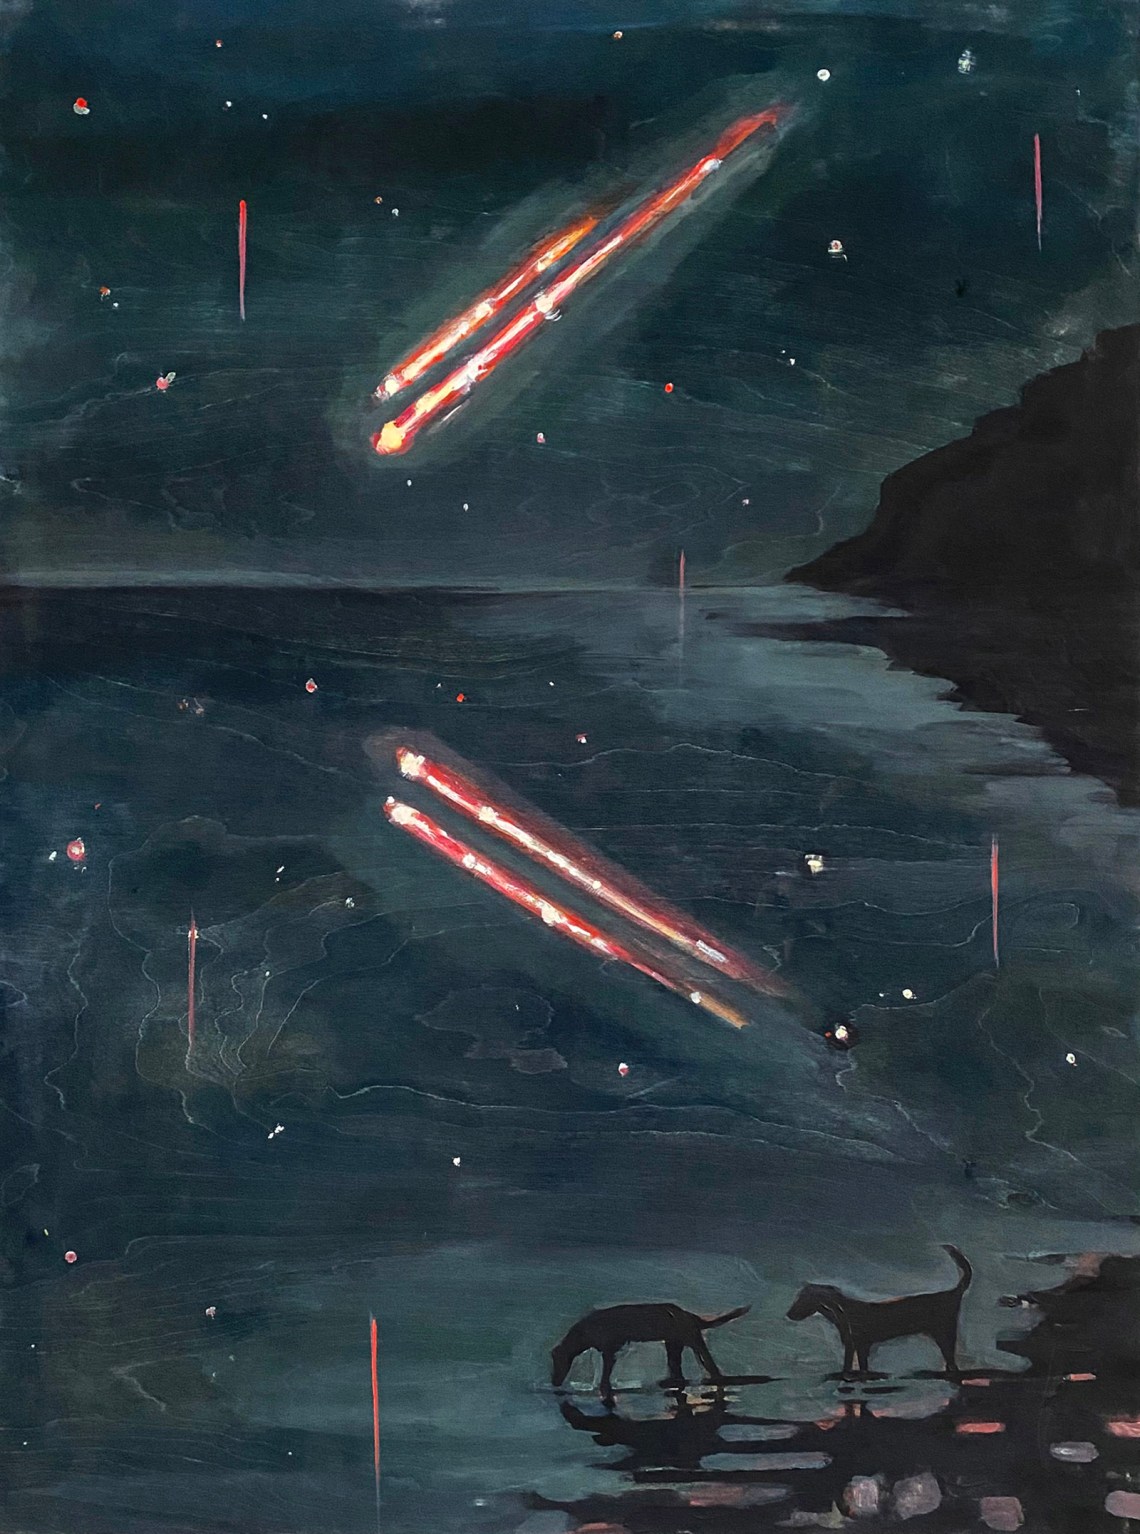 A painting of shooting stars at night over a body of water